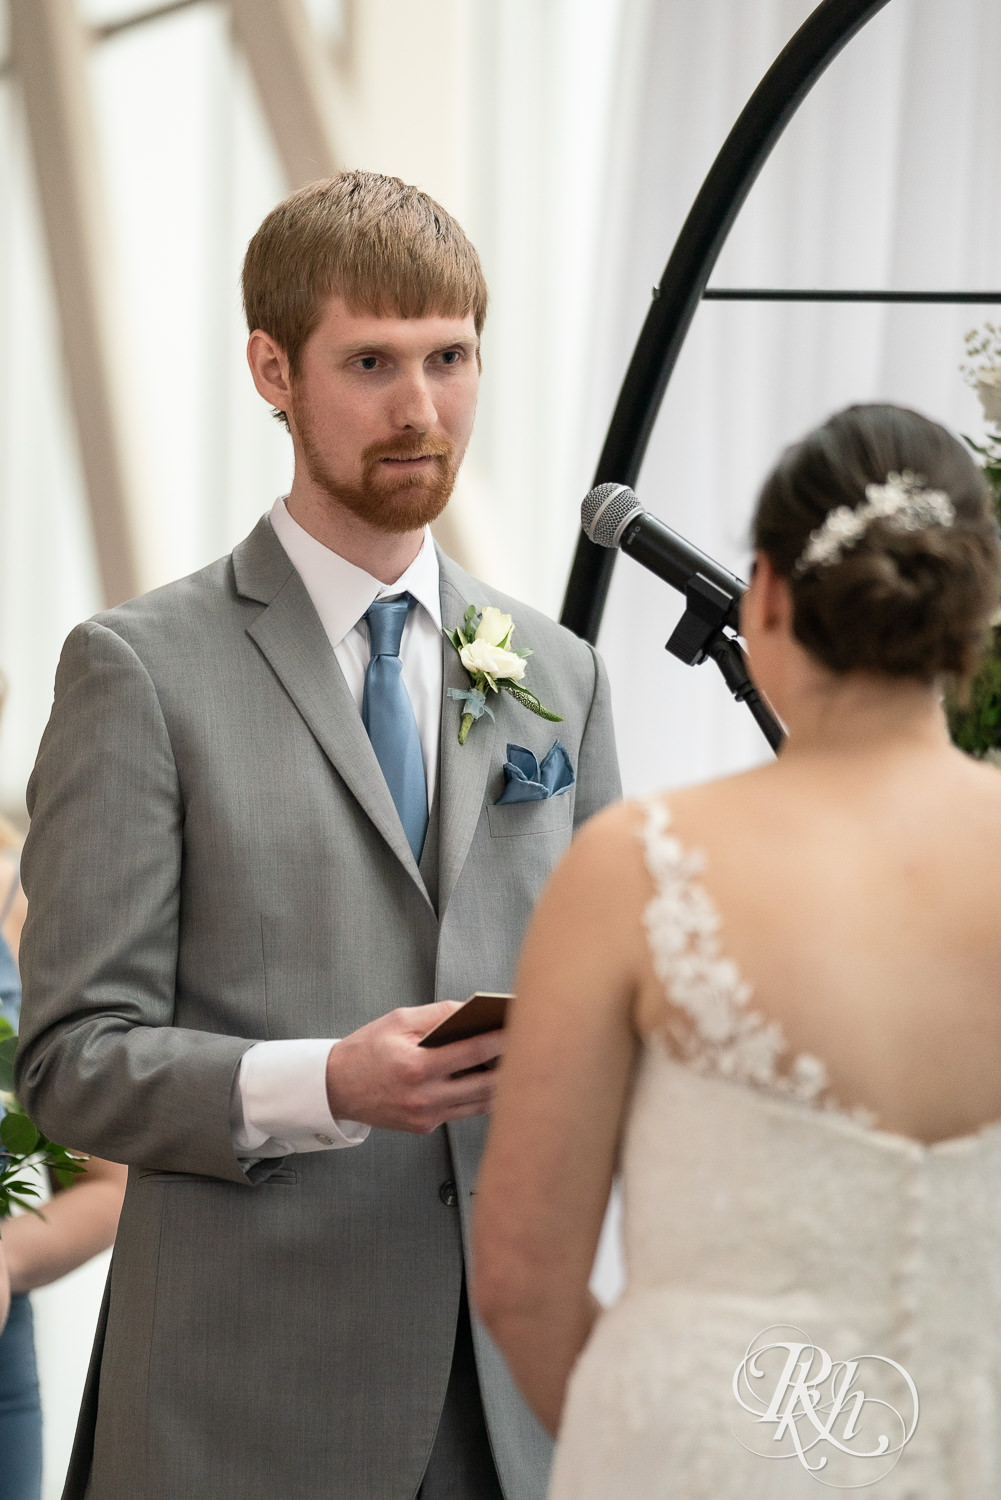 Groom reads vows during wedding ceremony at Doubletree Hilton Saint Paul in Saint Paul, Minnesota.